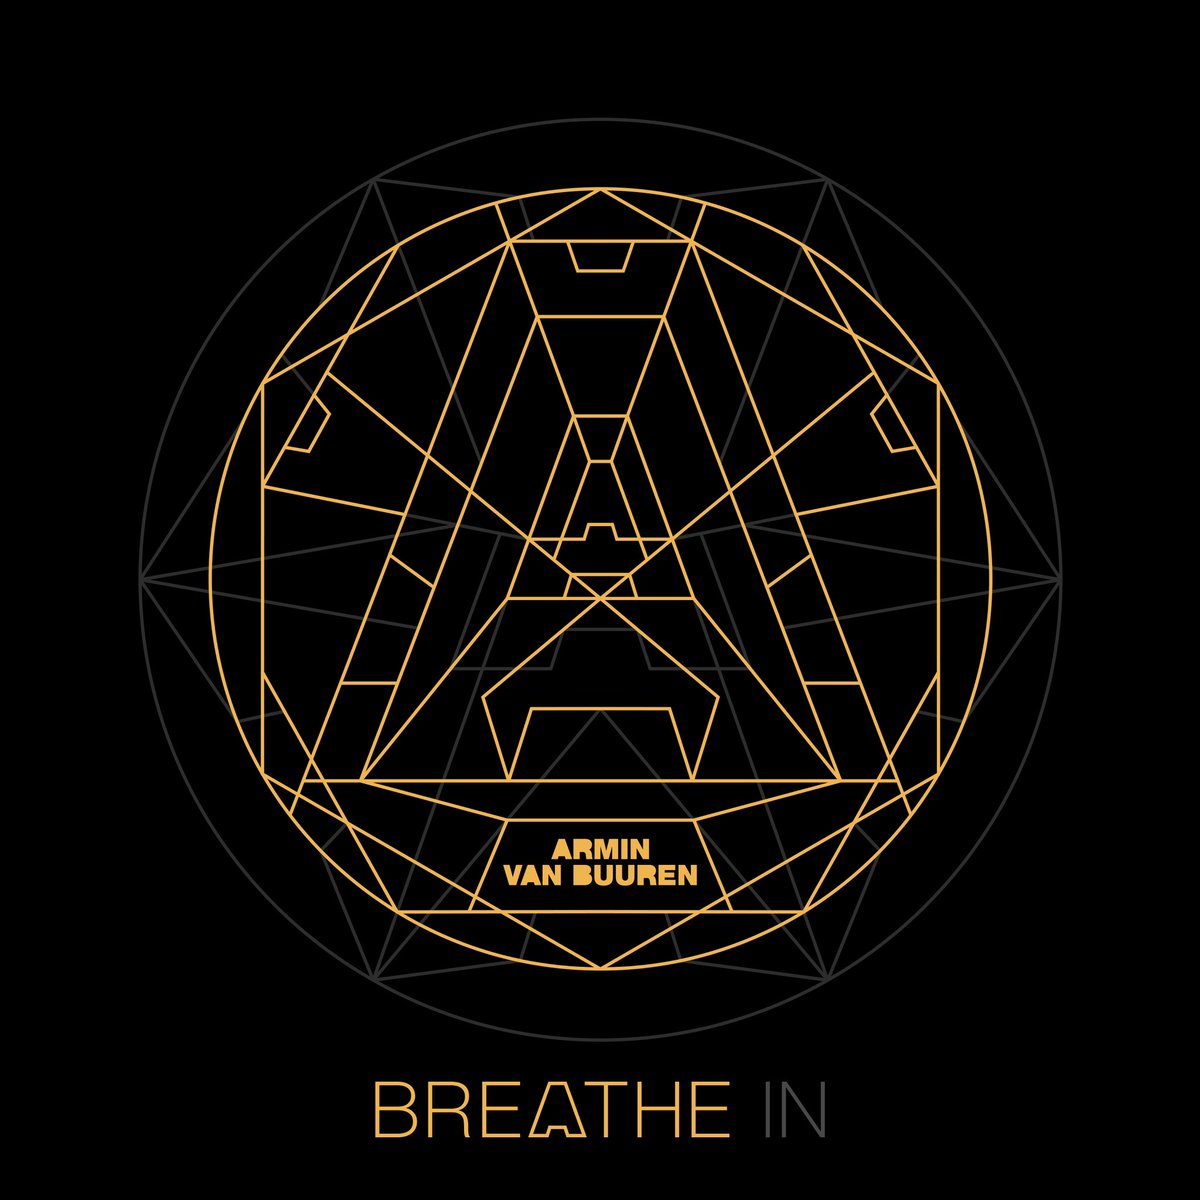 ffm.to/breatheinavb.O… The time has come for my ninth artist album called ‘Breathe In’. Coming to you on January 12, ‘Breathe In’ is truly a celebration of life and an ode to how music and dance floors can bring people together. This album is about connecting with each other